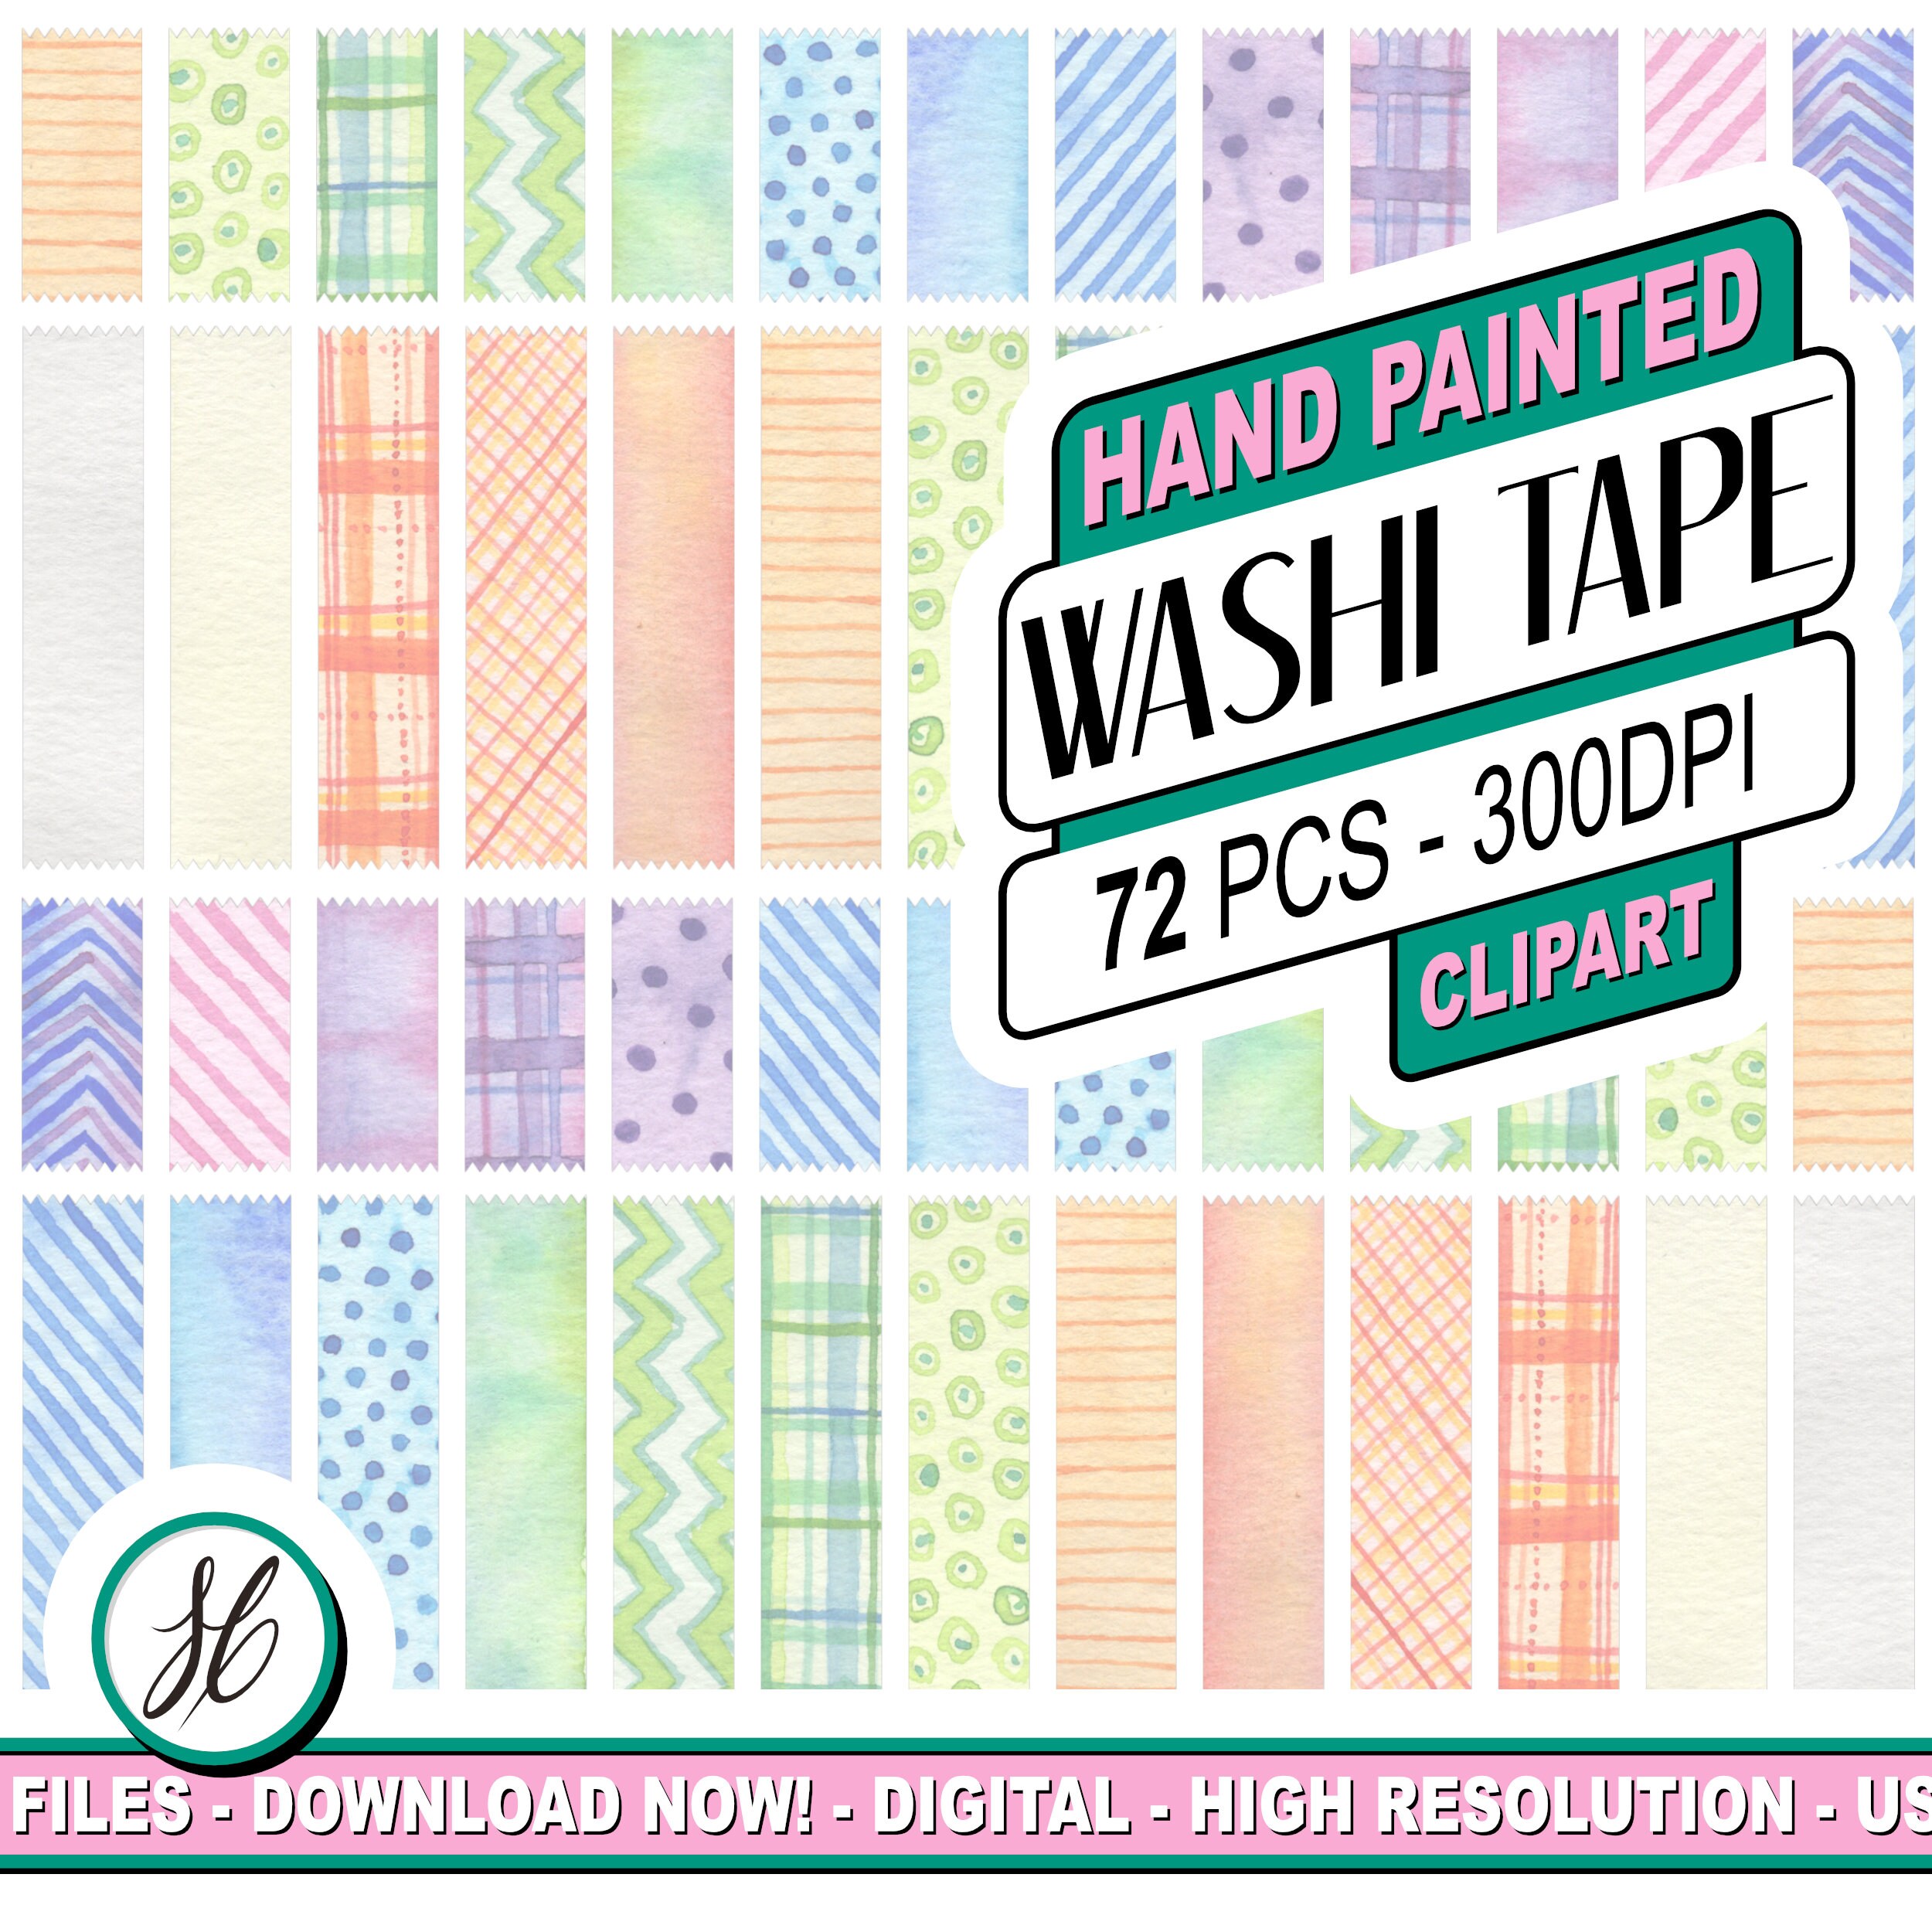 Primary Colors Washi Tape Digital Clip Art Graphic Download, Clipart  Digital Washi Tape Scrapbook Supplies, Digital Supplies, Back to School 